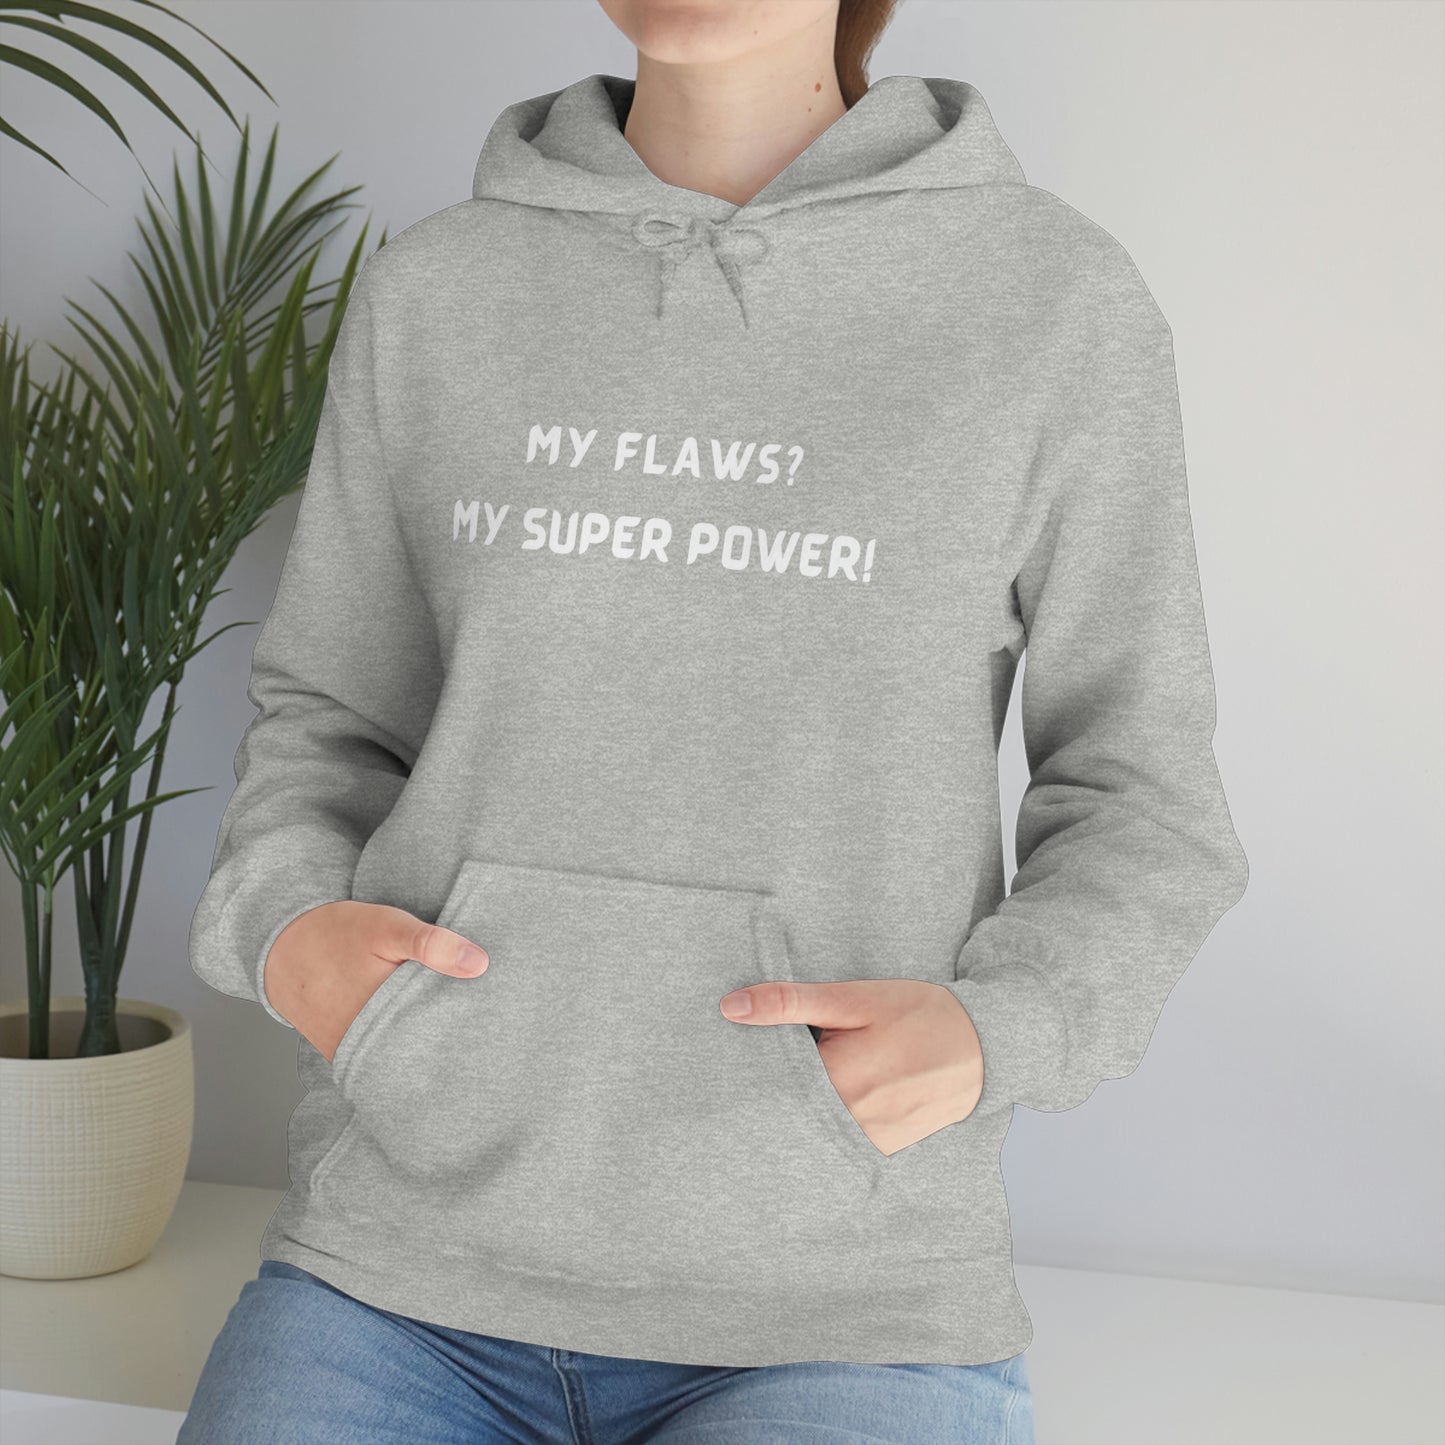 MY FLAWS? MY SUPER POWER UNISEX HOODIE  GIFT FOR SELF GIFT FOR FRIENDS   GIFT FOR FAMILY